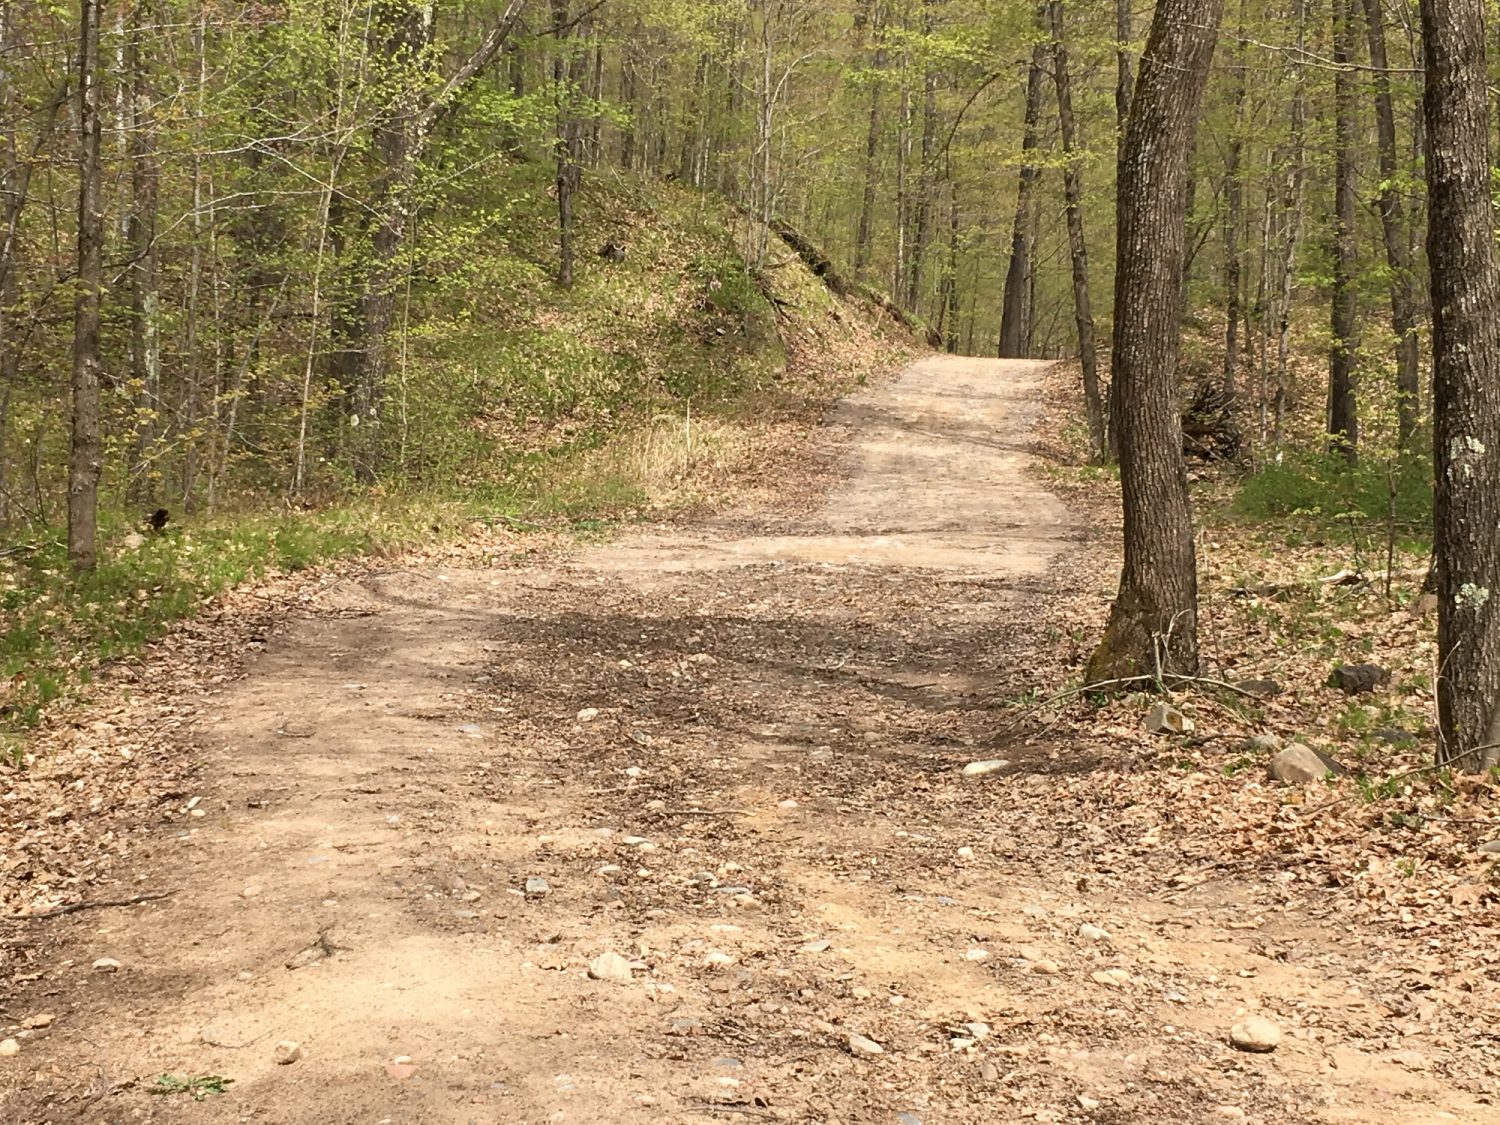 Lincoln County opens summer recreation trails, campgrounds